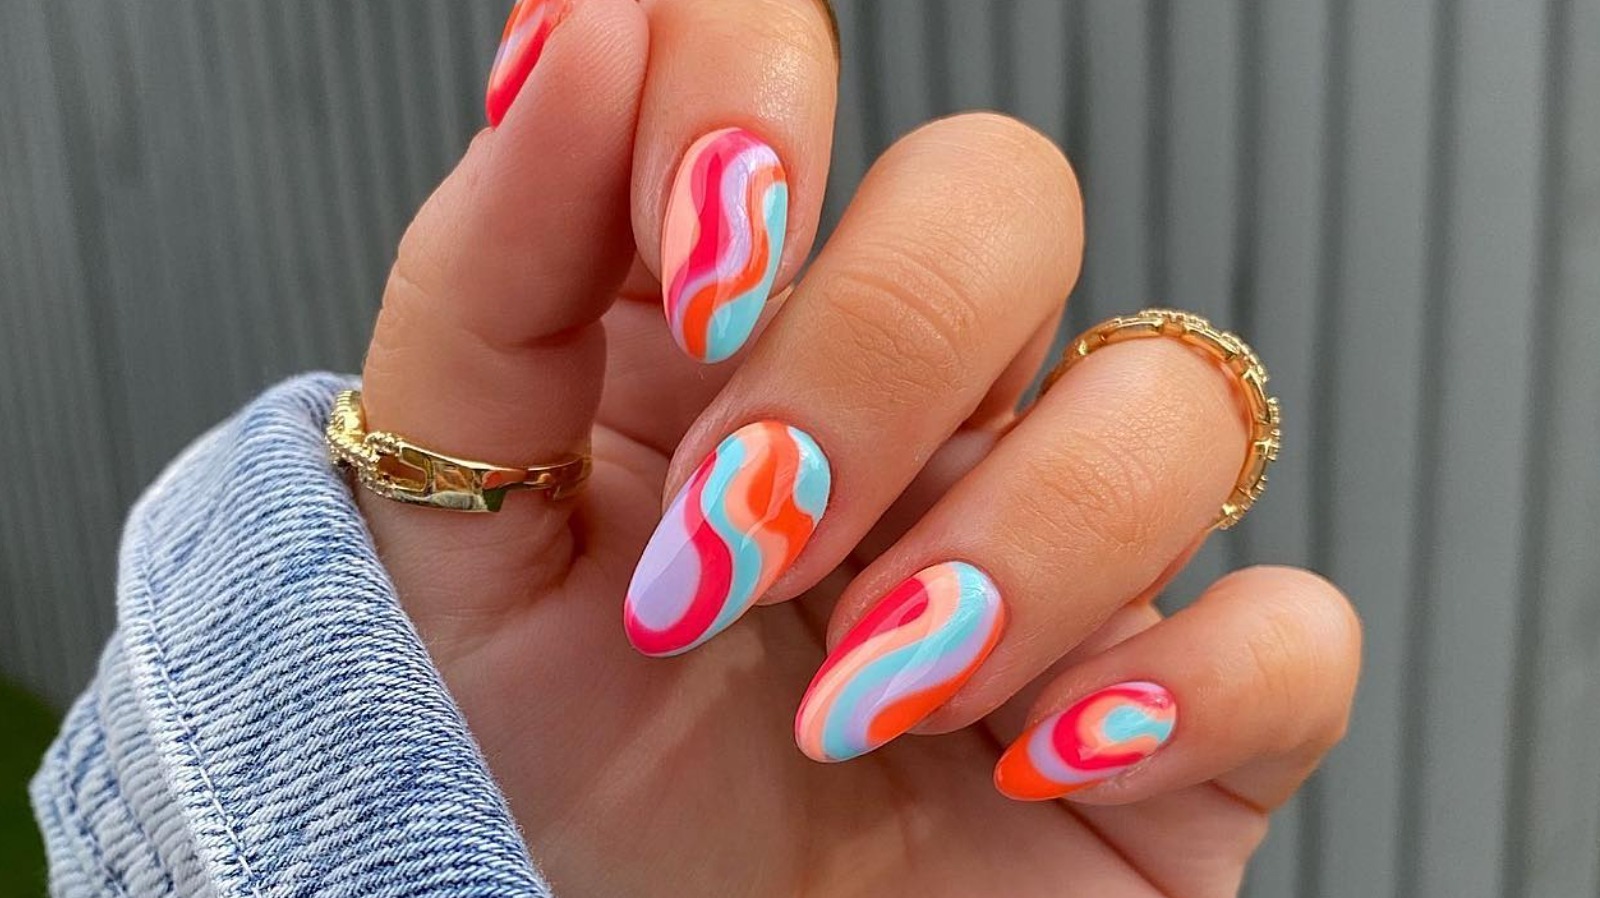 The Swirly '70s Manicure Trend That Will Bring A Retro Aesthetic To Your  Nails